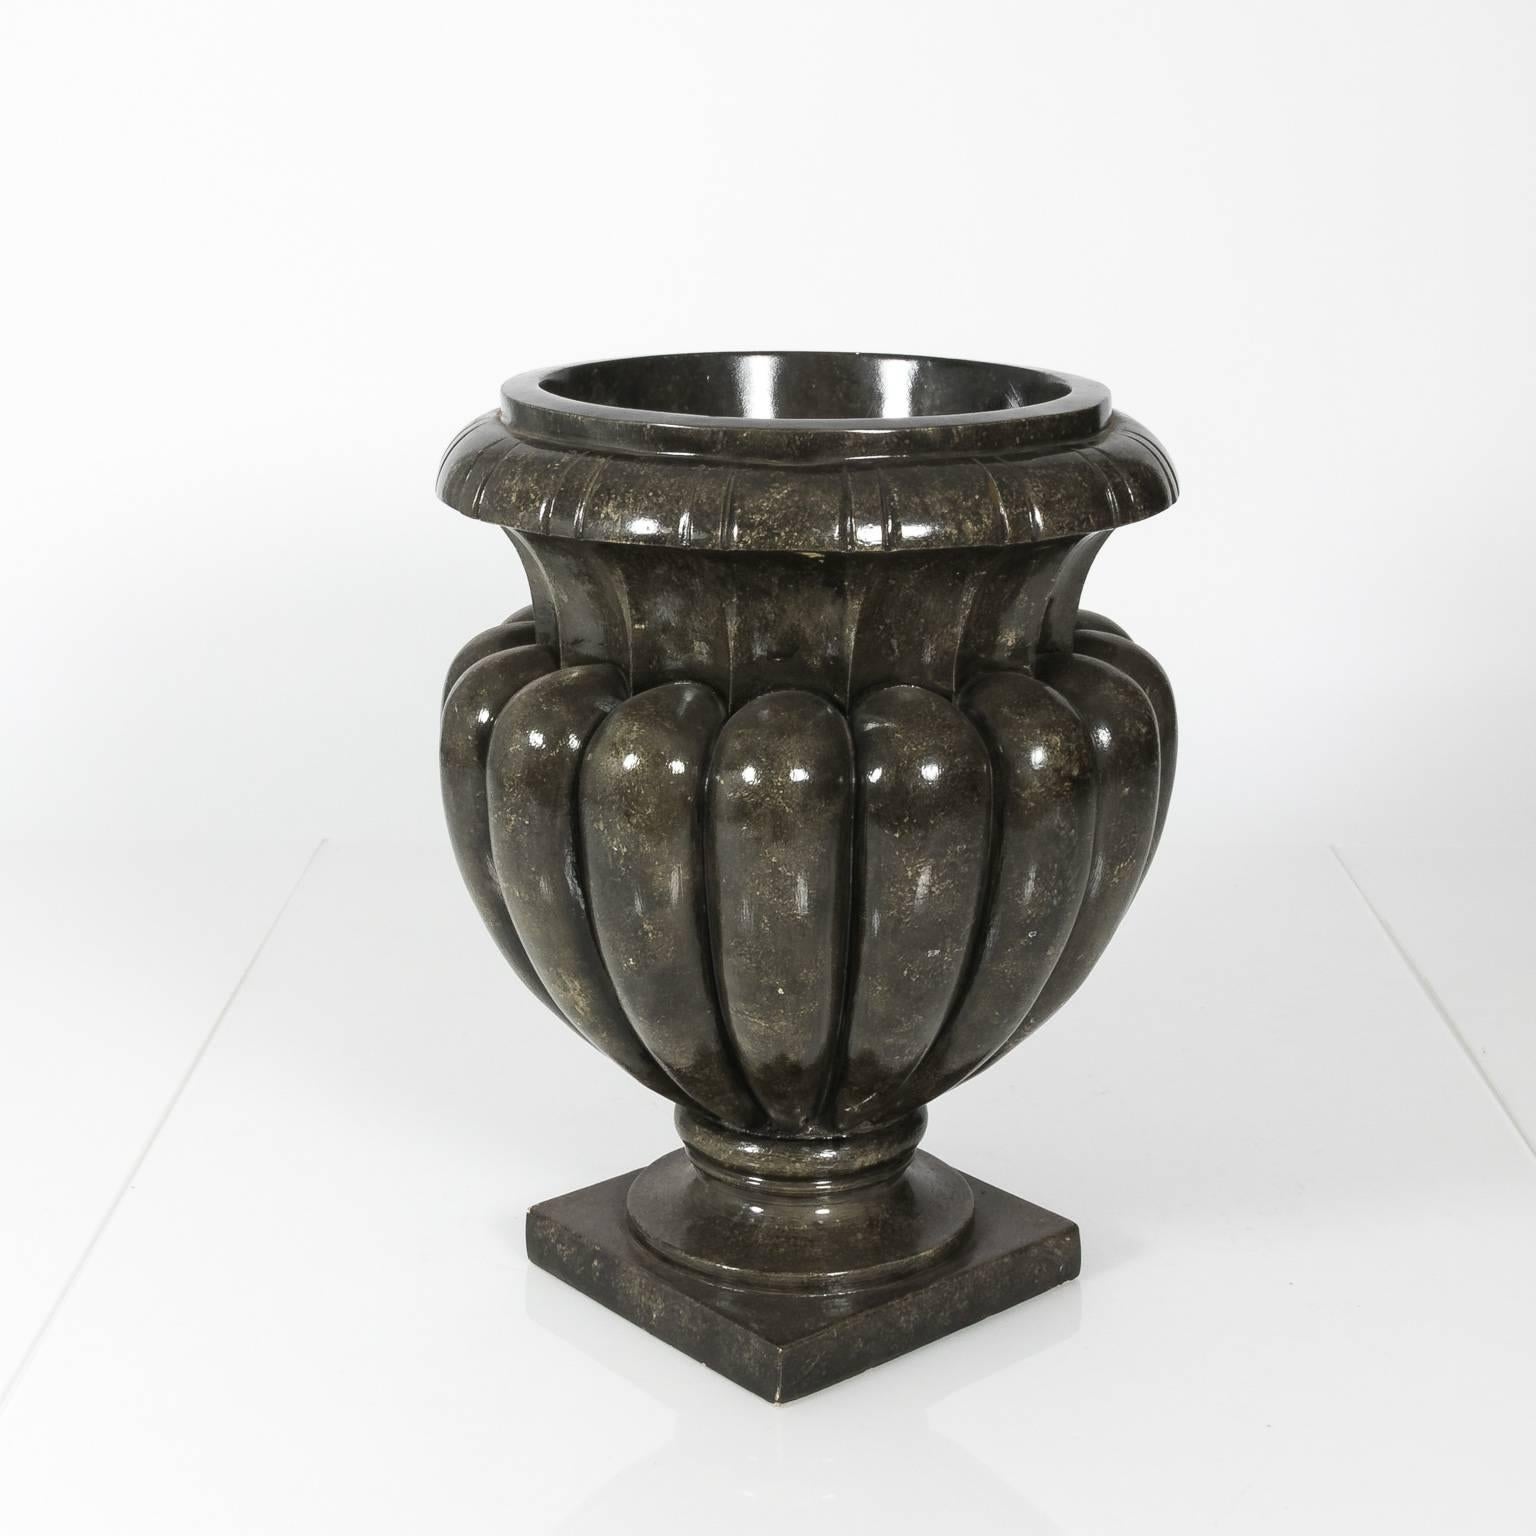 Pair of light weight composite urns with faux granite trompe l'oile finish. 
